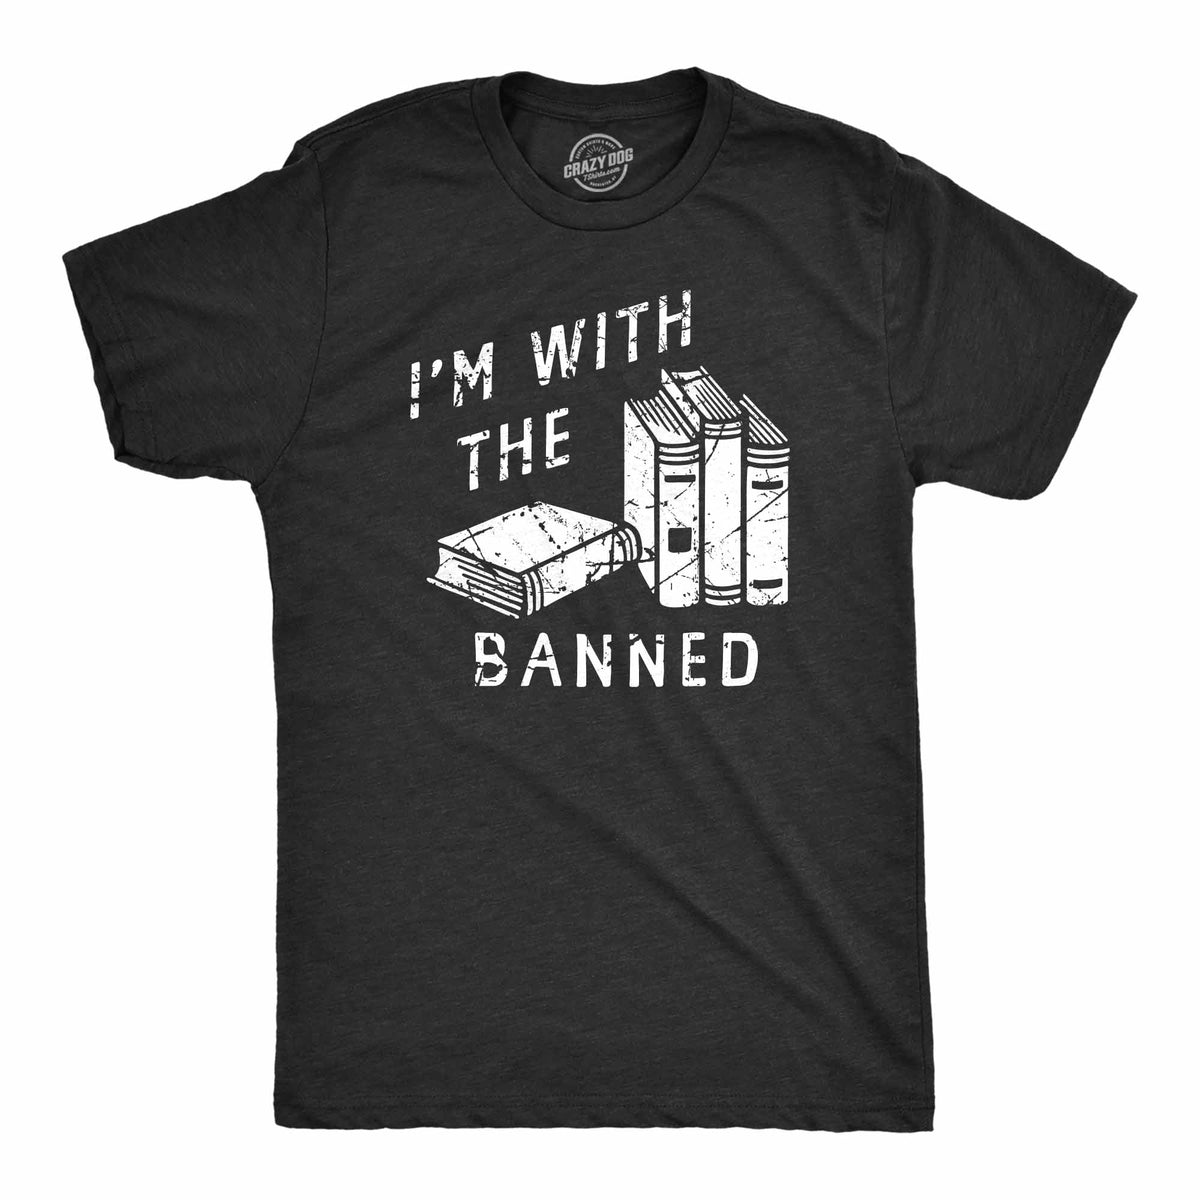 Funny Heather Black - BANNED Im With The Banned Mens T Shirt Nerdy Nerdy sarcastic Tee